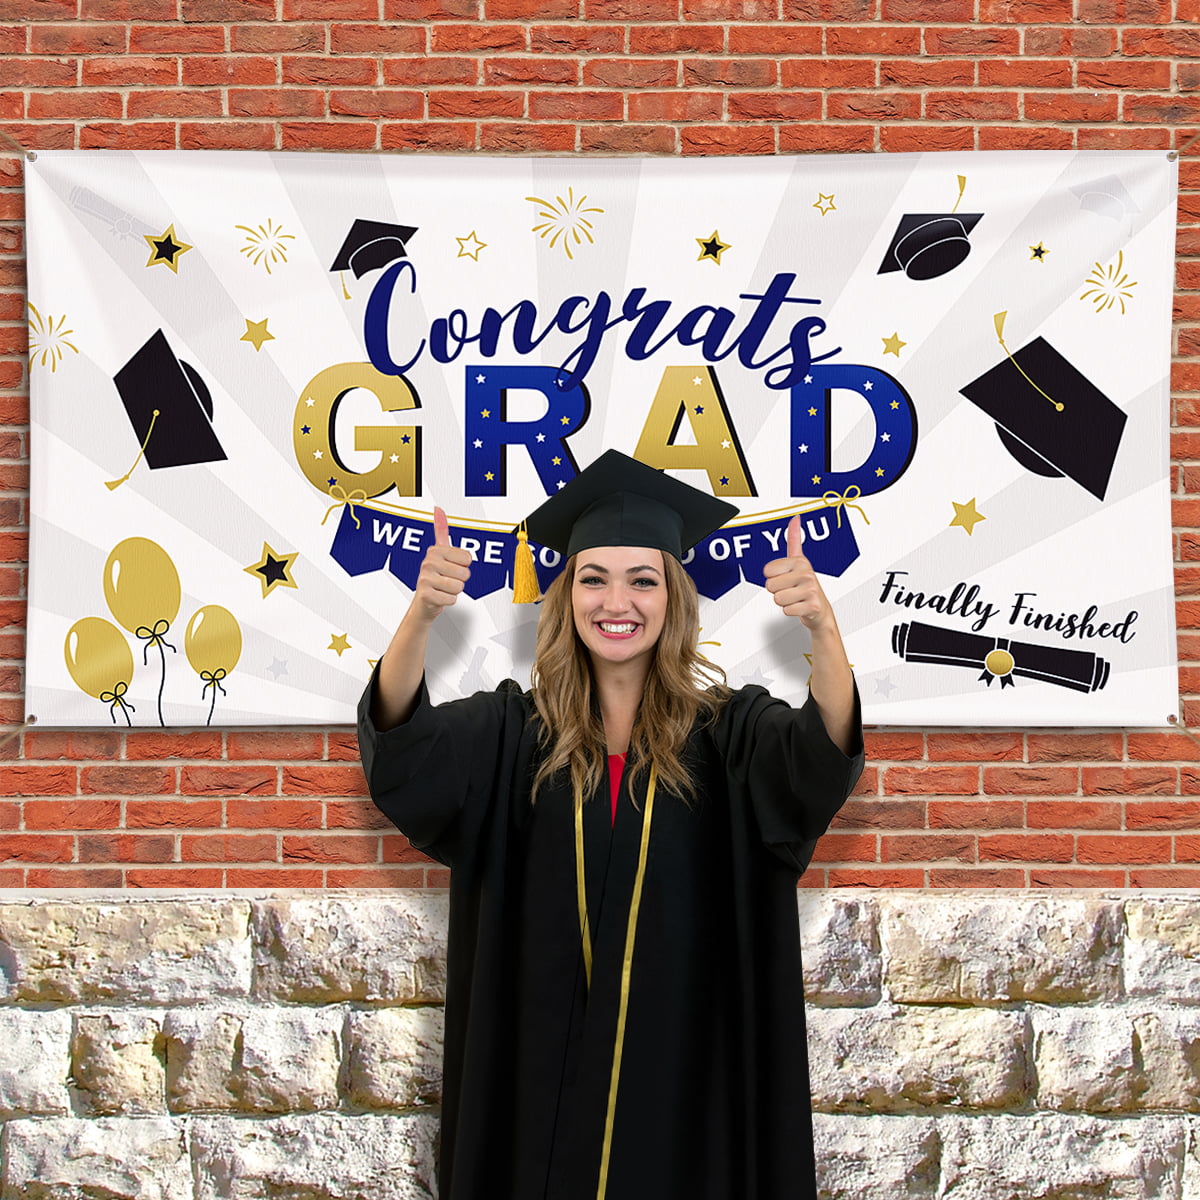 Trencher Cap Background 10x7ft Senior Year Polyester Photography Backdrop Blue Sky Throwing a Bachelors Hat Student Graduation Ceremony School Studenthood Class Group Photo Prop Wallpaper